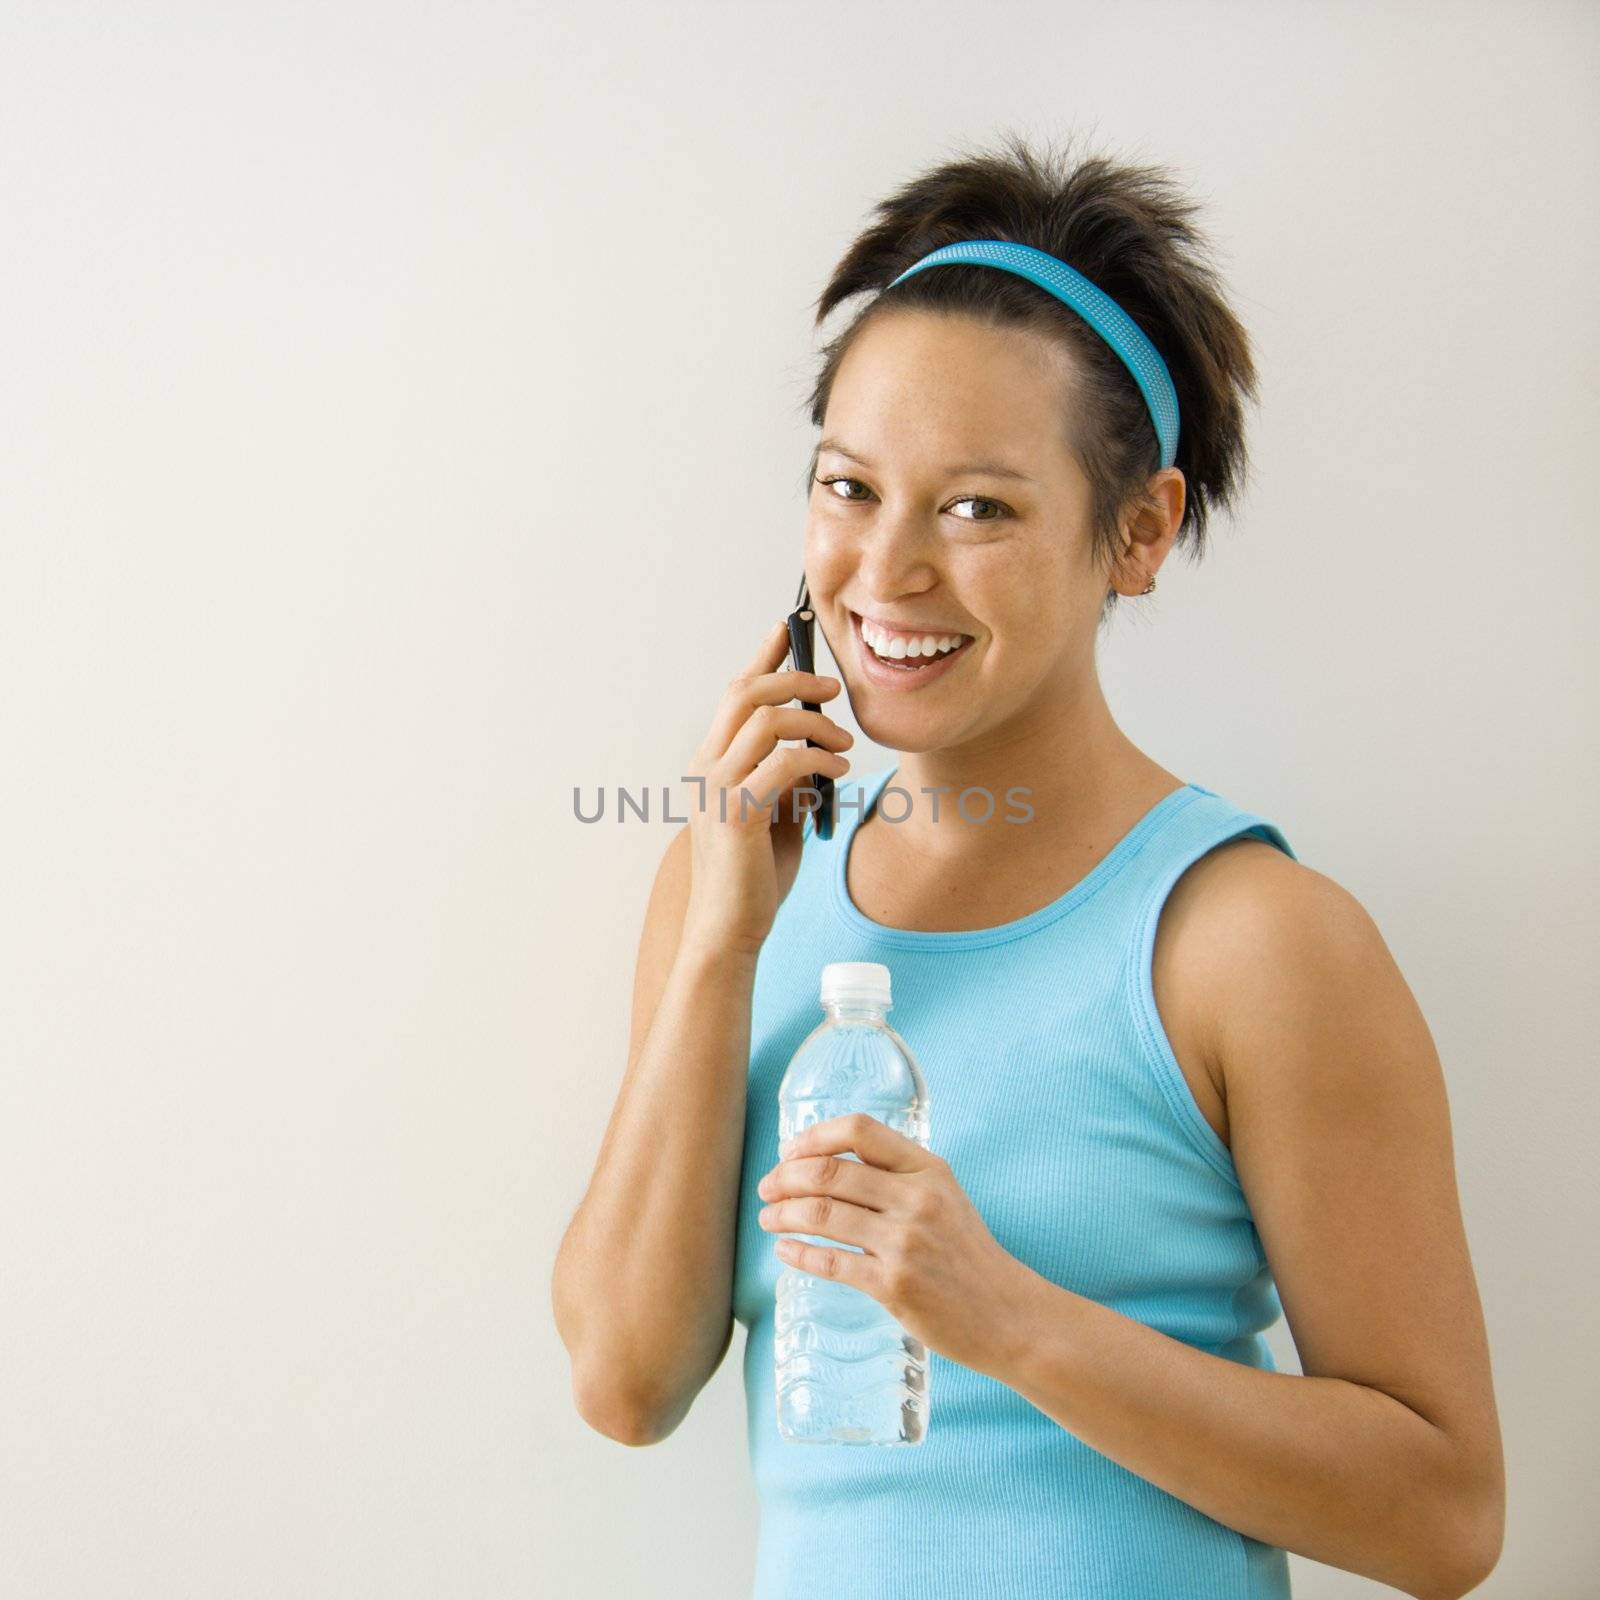 Young woman in fitness clothing holding bottled water talking on cellphone smiling.